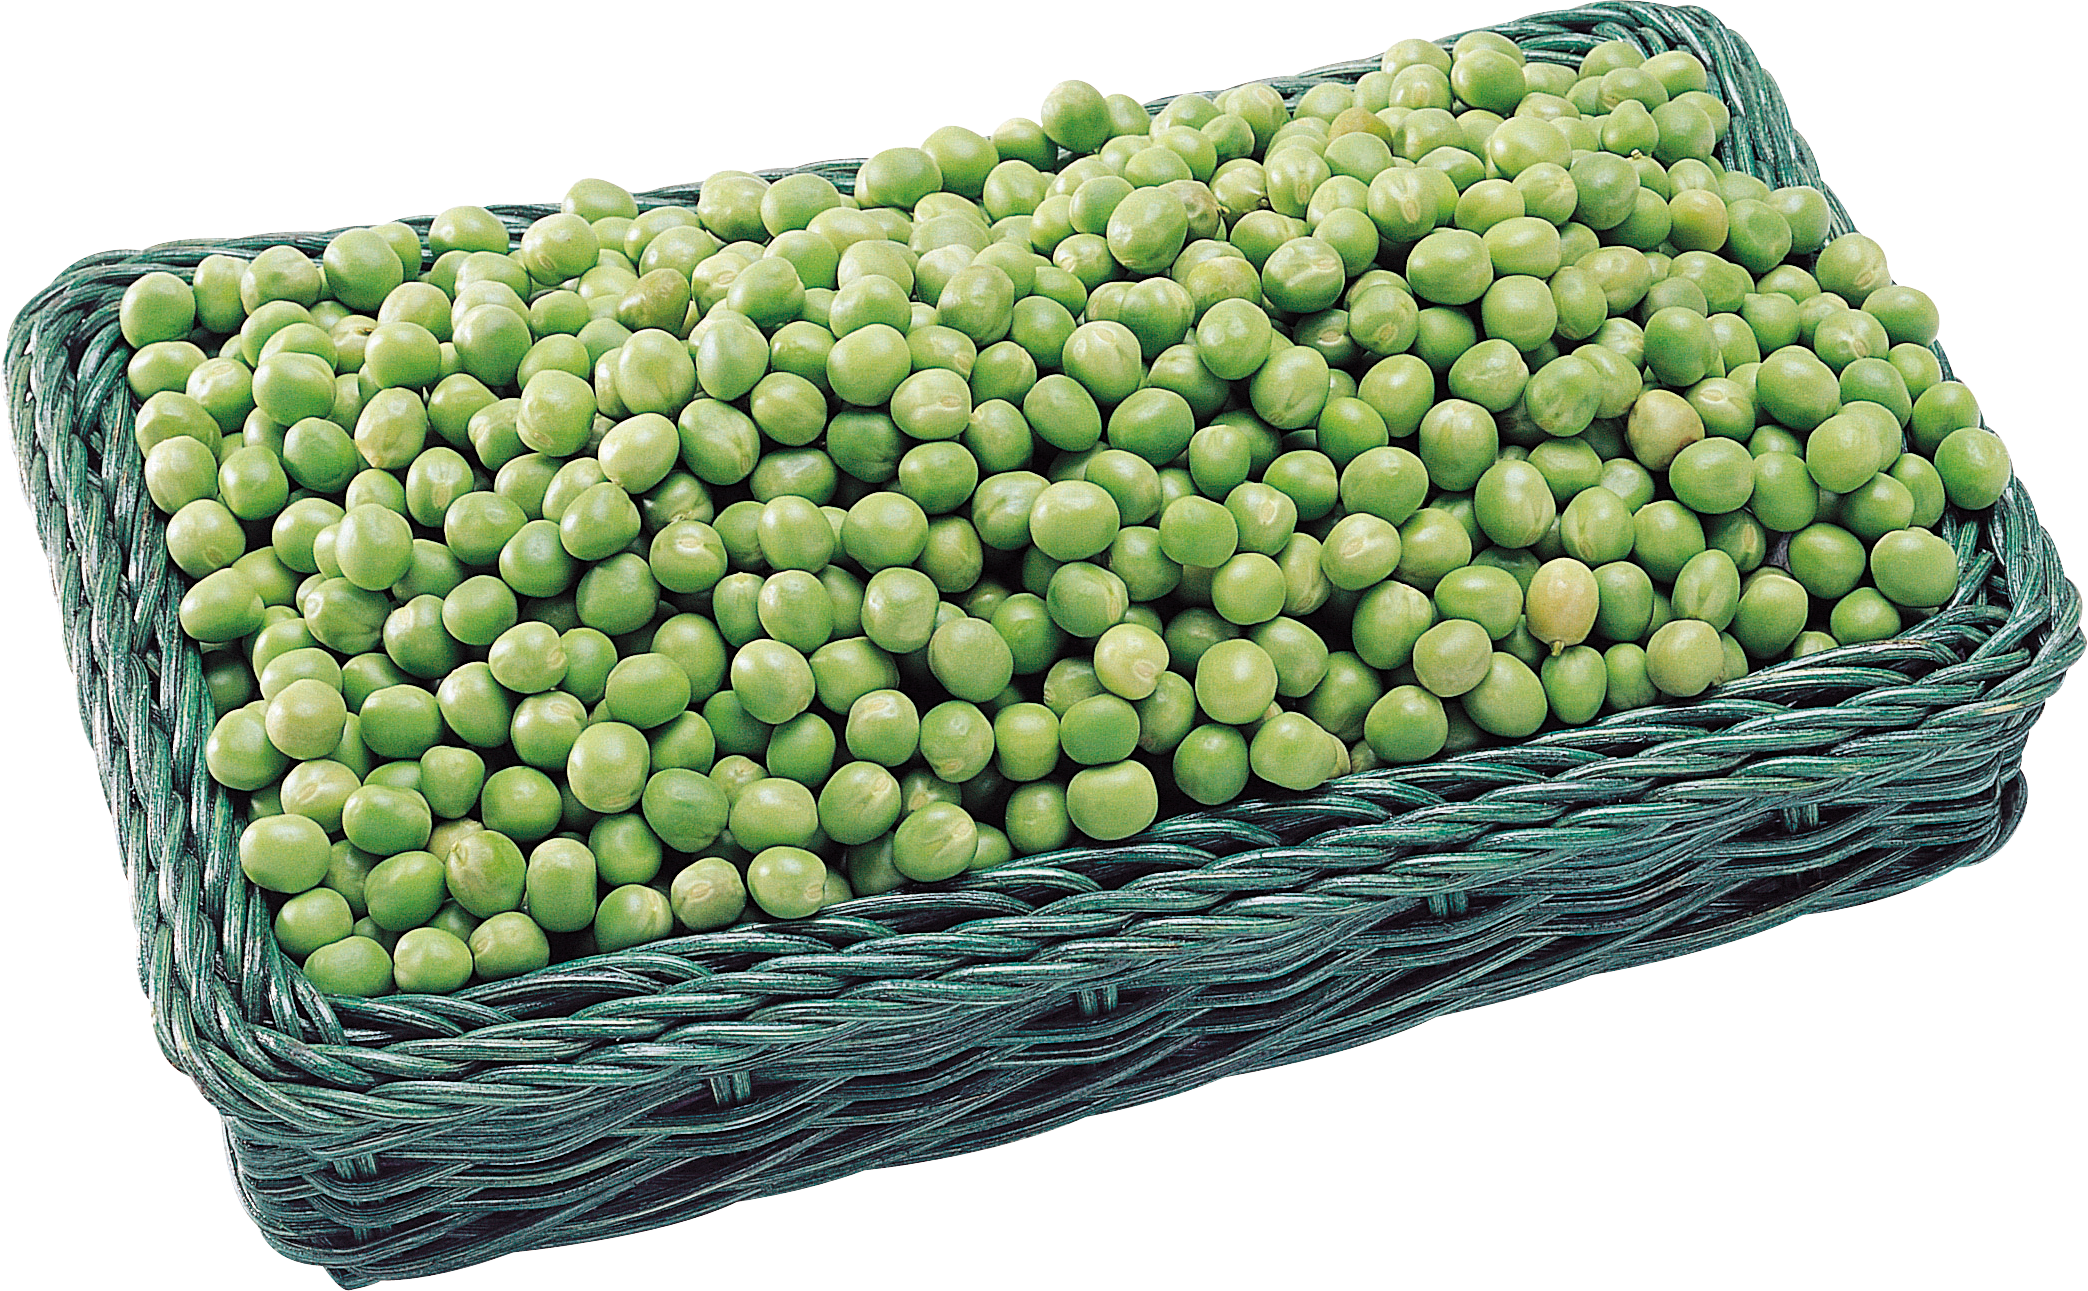 Pea png images free. Peas clipart three